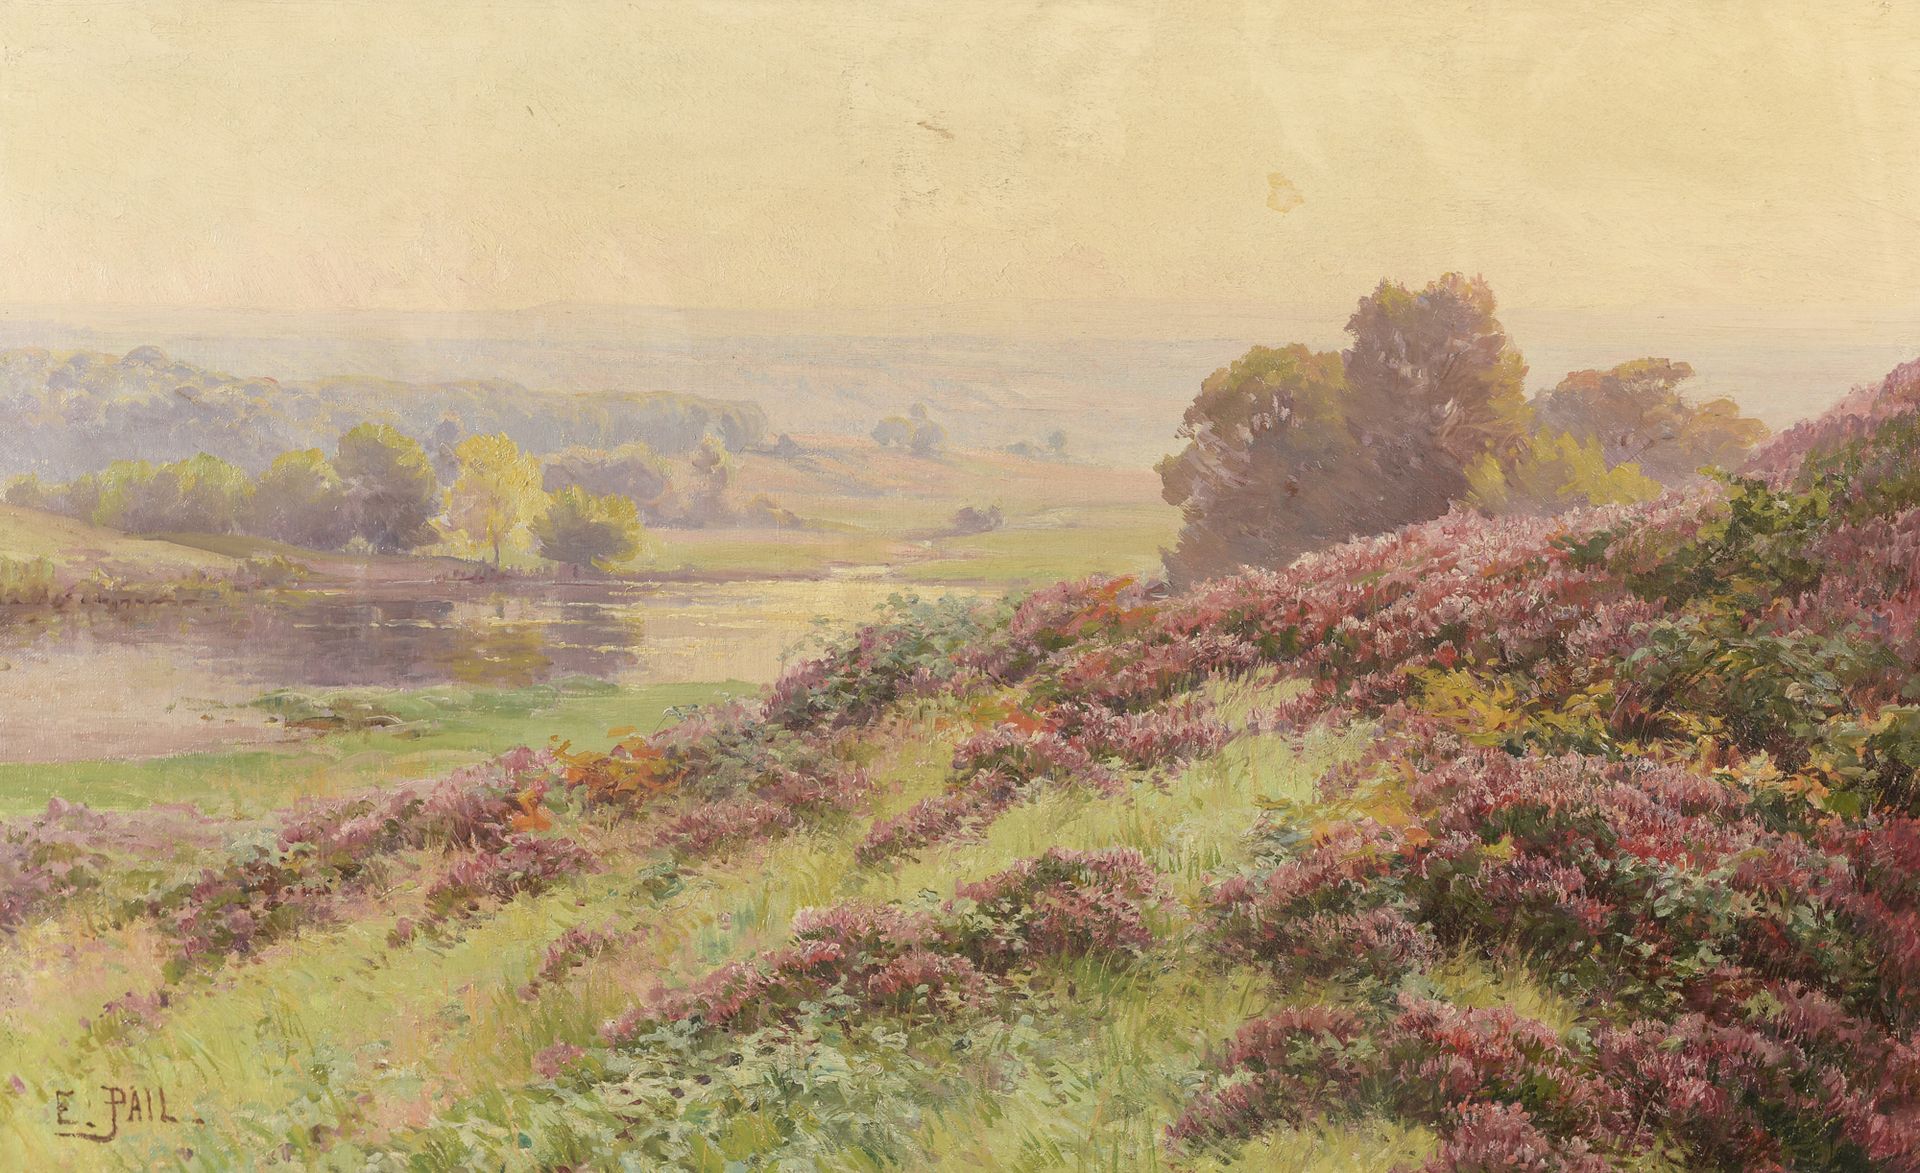 Null Edouard PAIL (1851-1916)

The heaths

Oil on canvas, signed lower left.

(P&hellip;